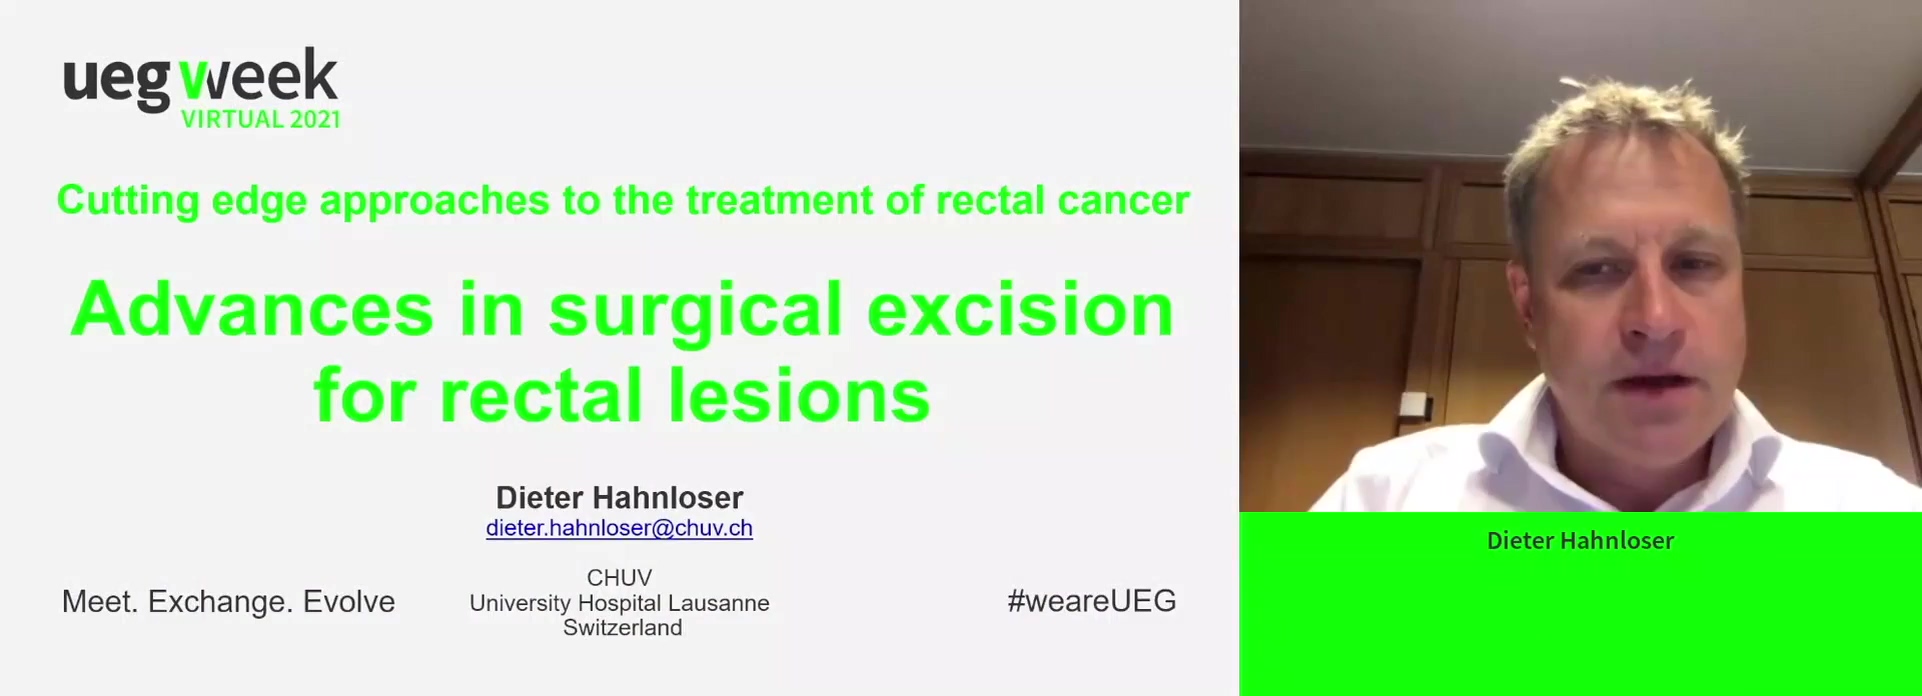 Advances in surgical excision for rectal lesions